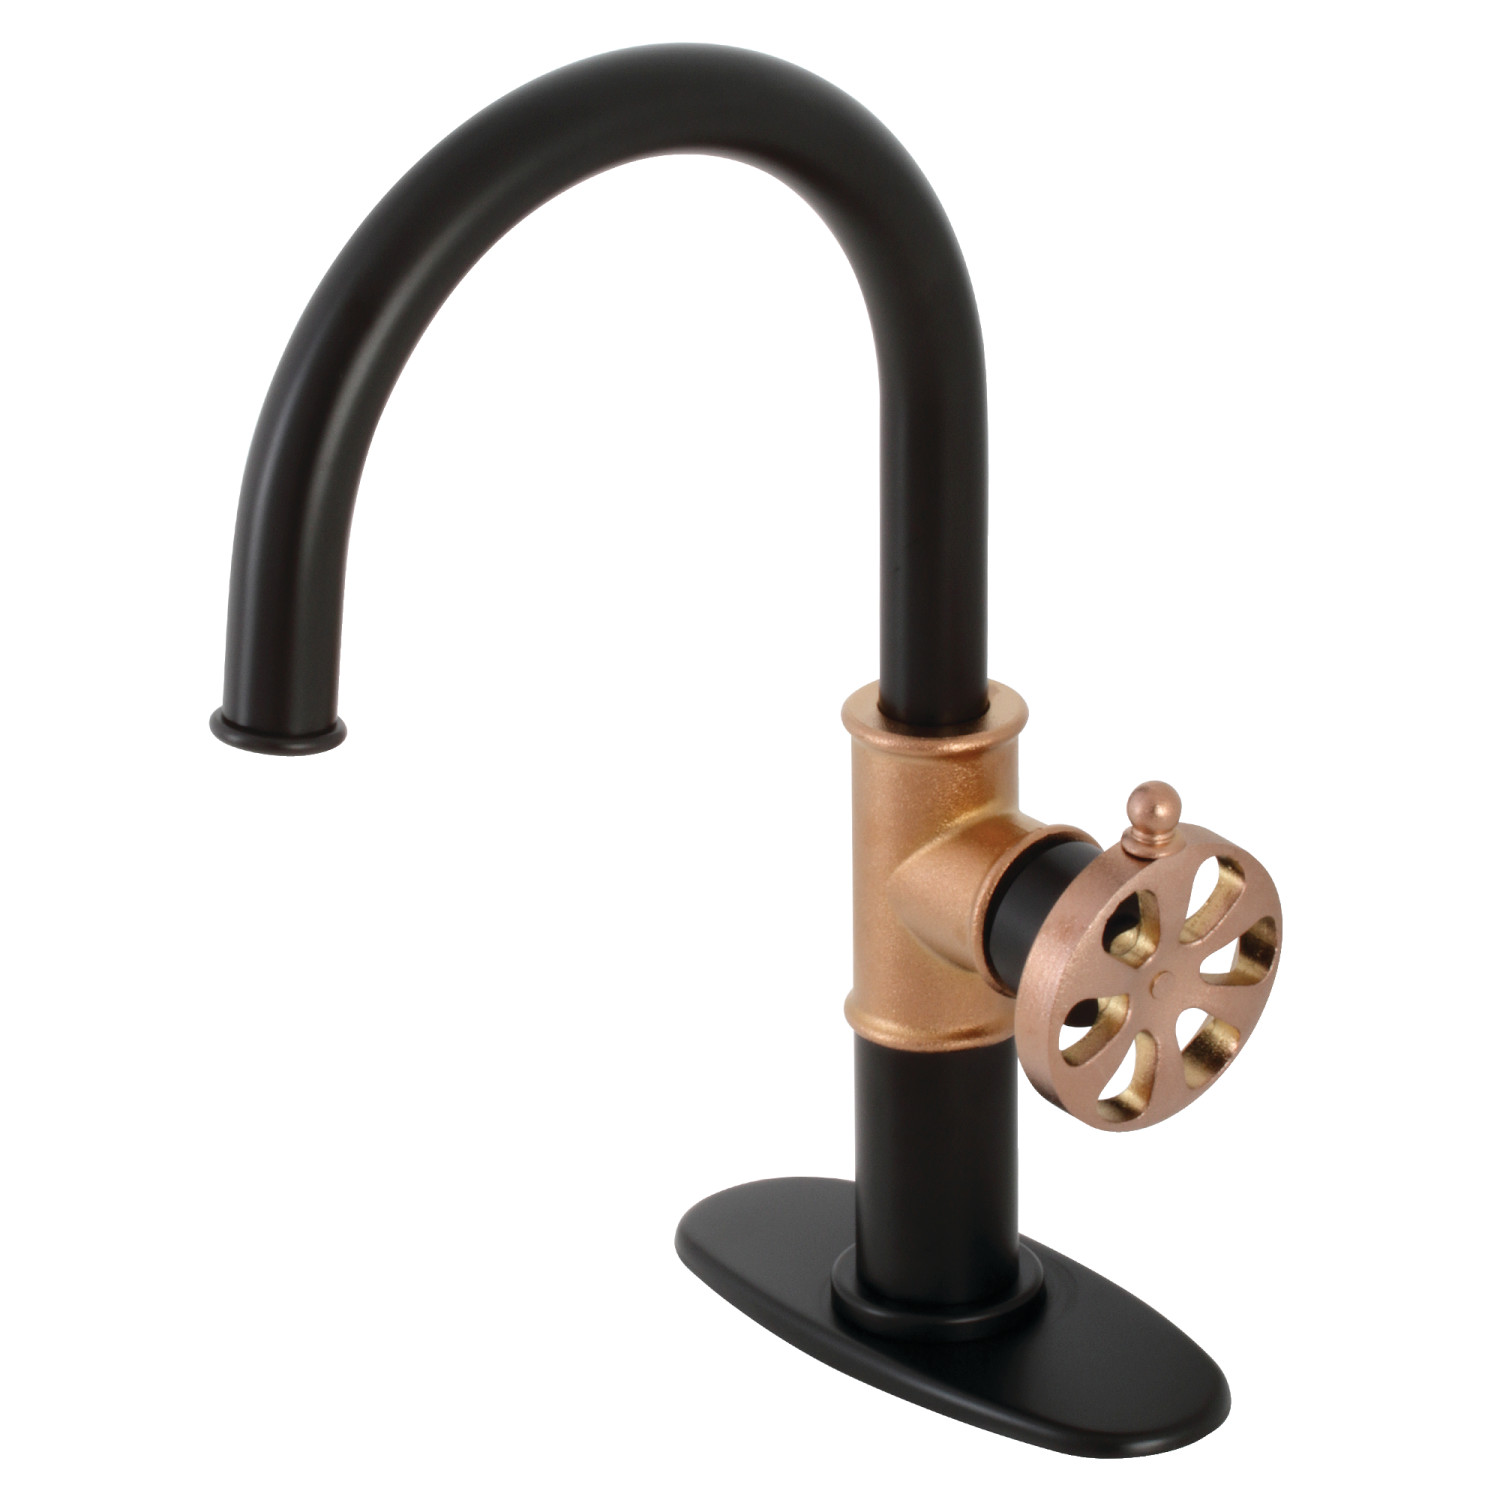 Single-Handle 1-Hole Deck Mount Bathroom Faucet with Push Pop-Up and Deck Plate in Matte Black/Polished Nickel